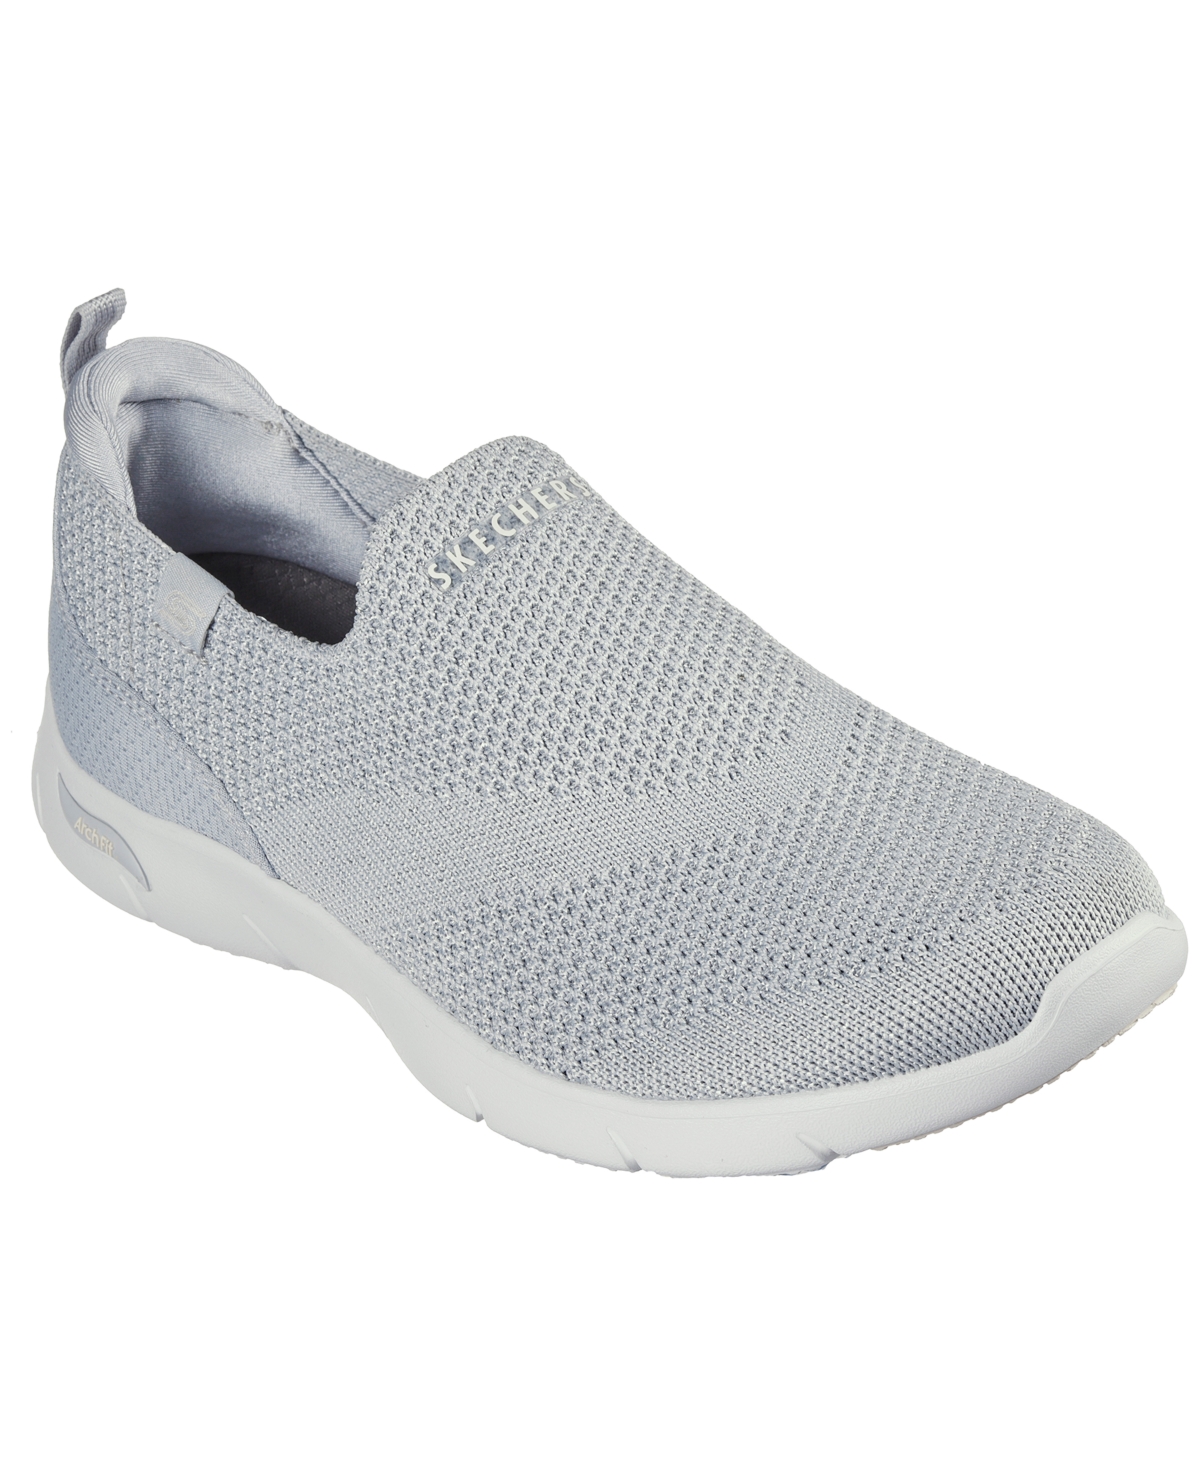 Women's Arch Fit Refine - Iris Slip-On Casual Sneakers from Finish Line - Gray